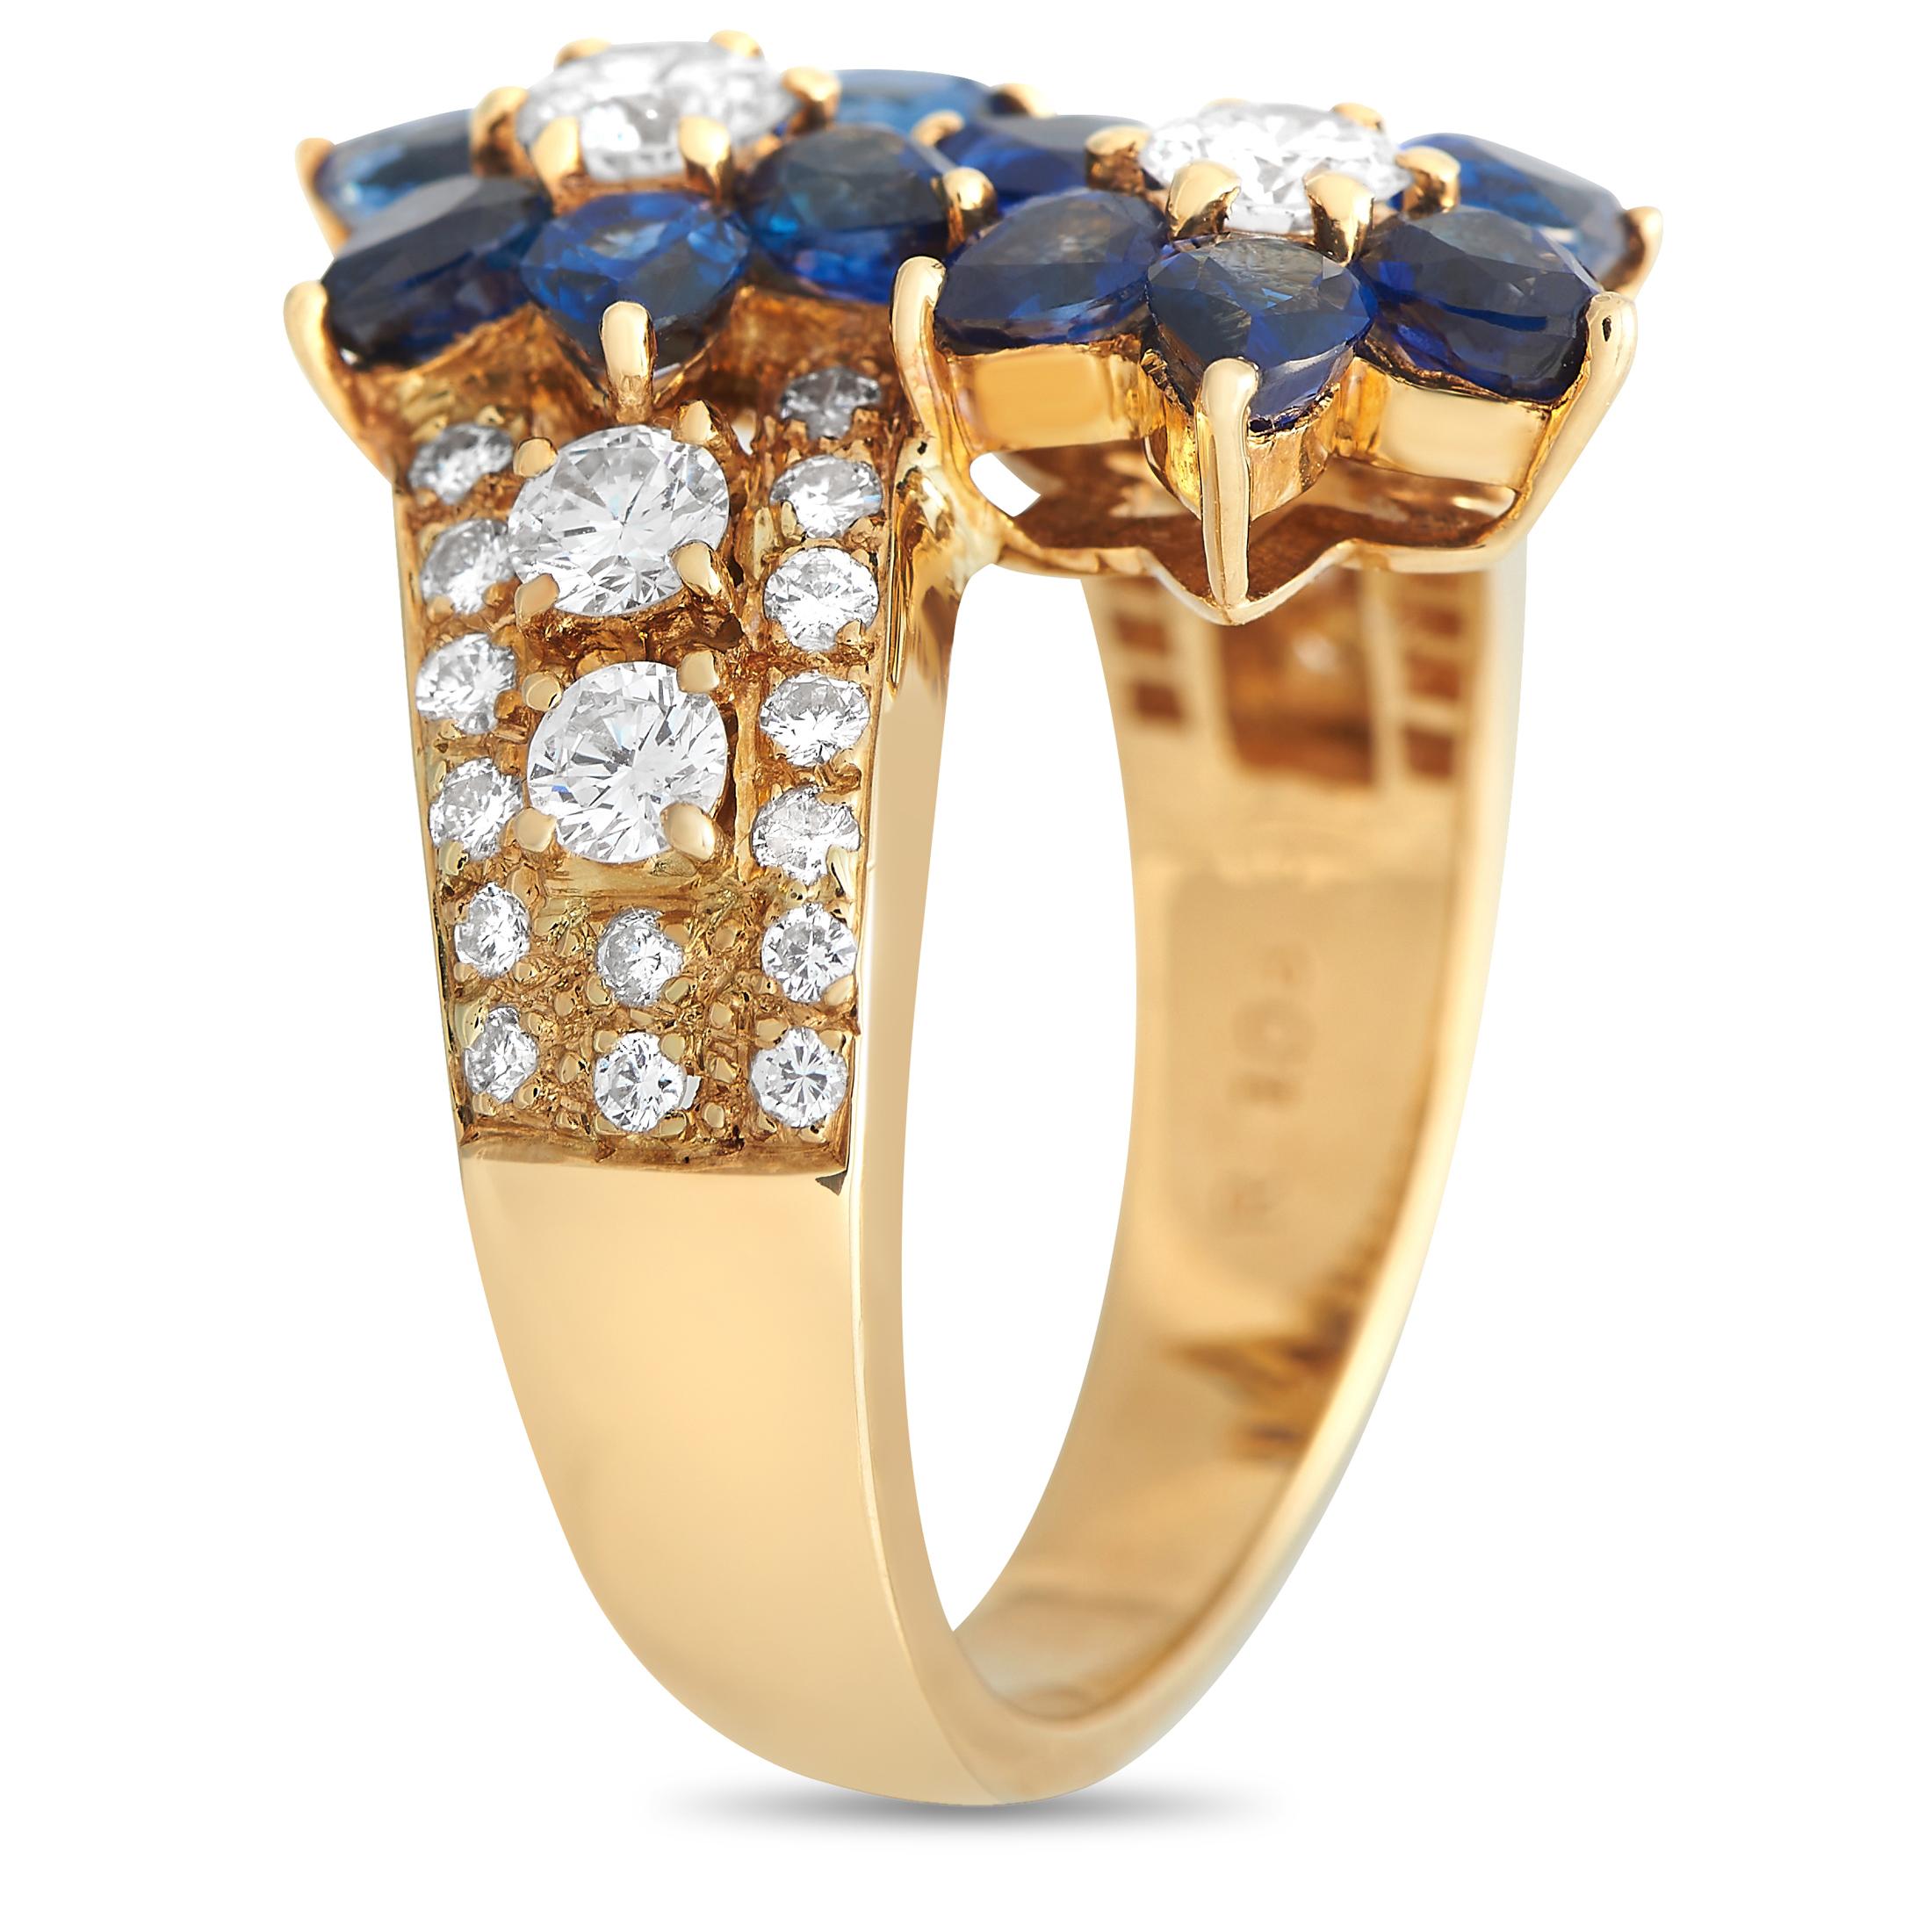 Twin floral motifs serve as a stunning focal point on this exquisite luxury ring. This elegant accessorys 18K Yellow Gold setting perfectly showcases sparkling Diamonds with a total weight of 1.08 carats and captivating blue Sapphire gemstones